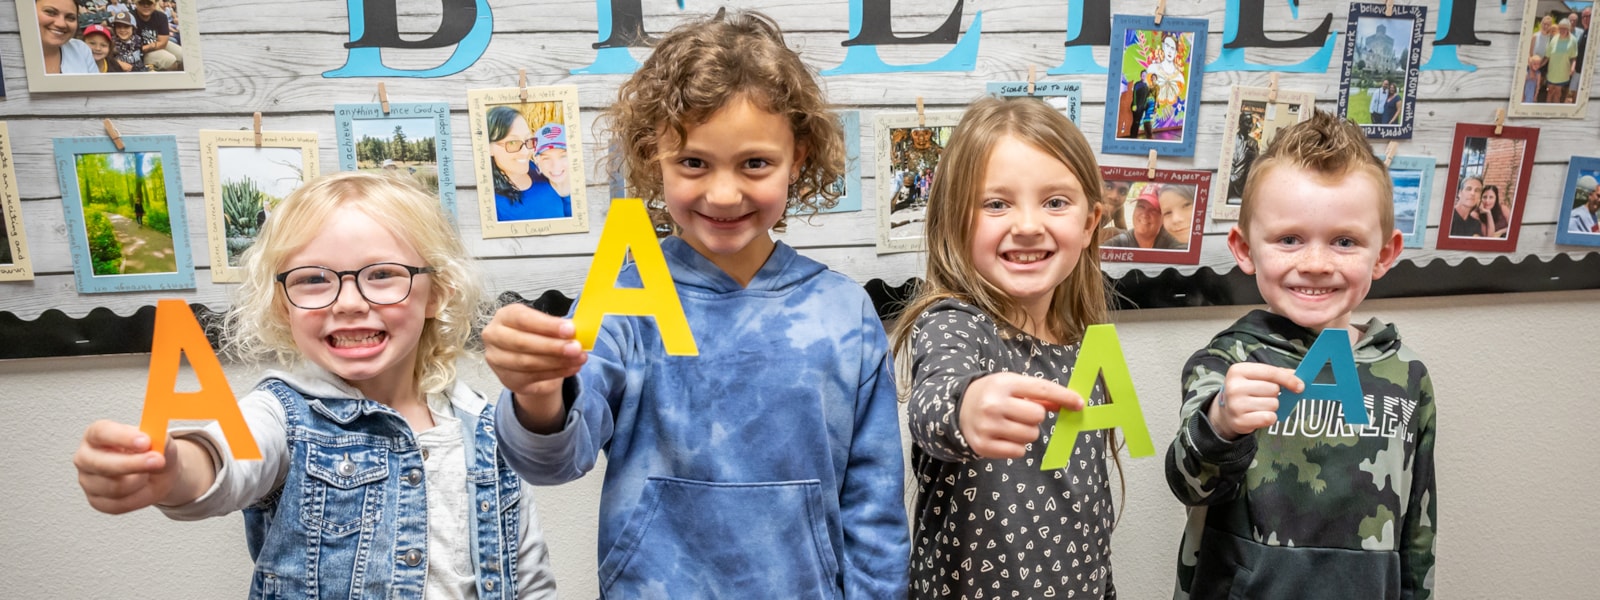 Students holding letter "A"s